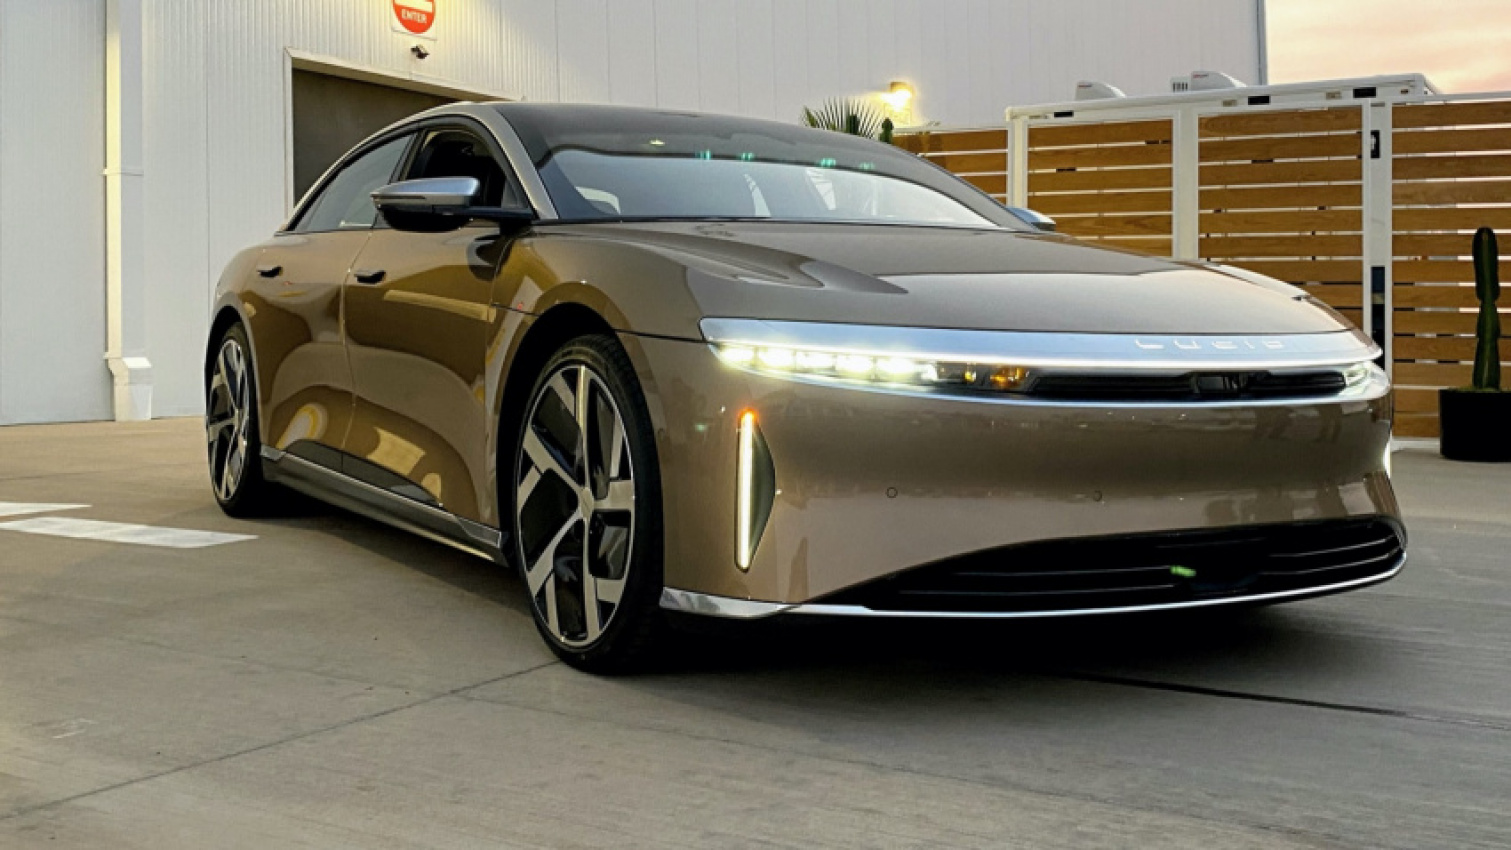 autos, cars, lucid, amazon, android, electric cars, first drives, amazon, android, first drive review: 2022 lucid air delivers a new leading edge for evs